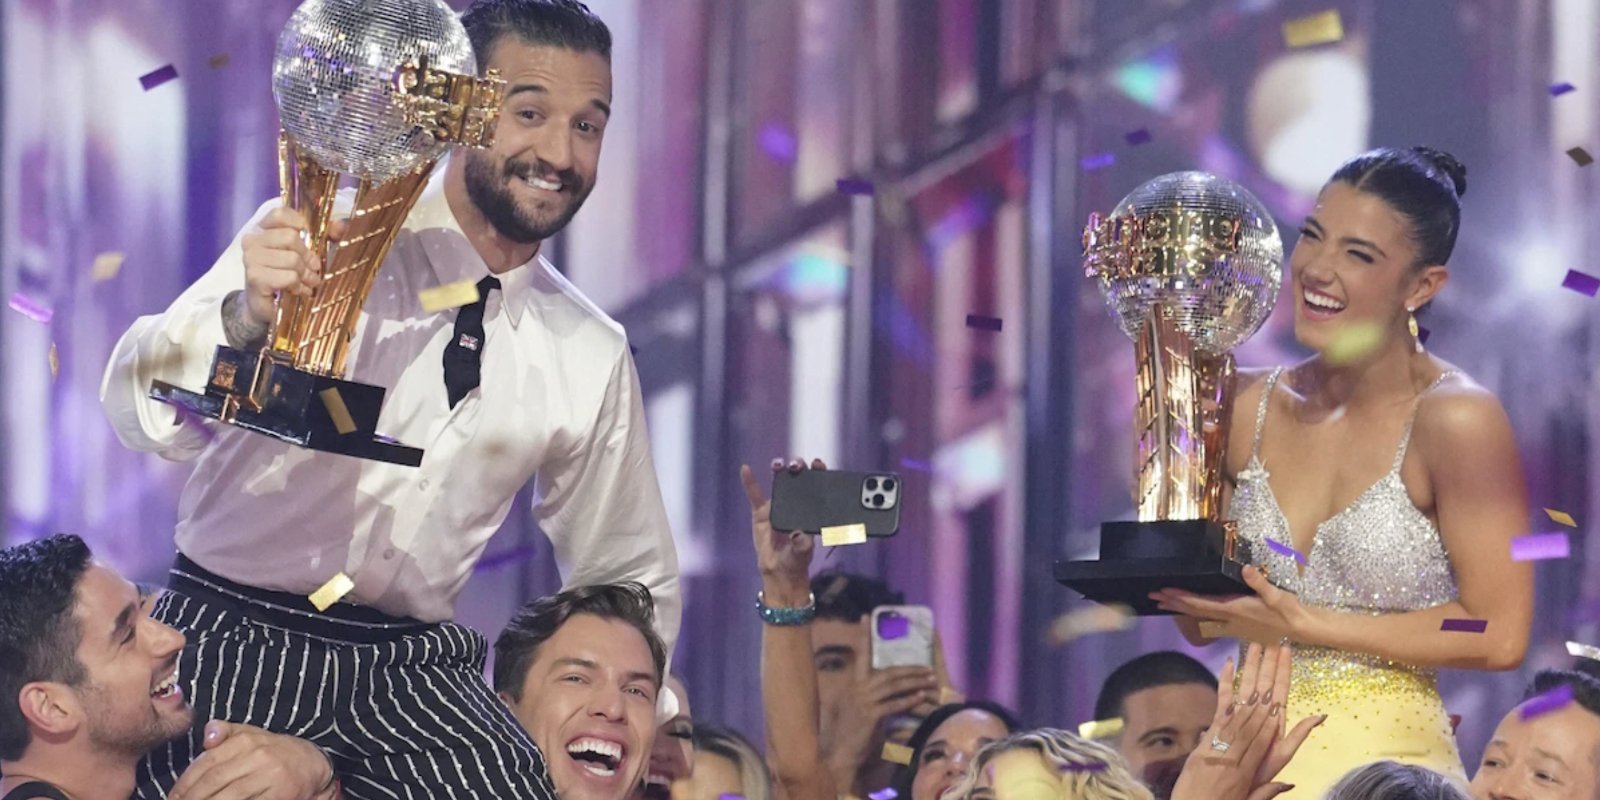 'Dancing with the Stars' Mark Ballas and Charli D'Amelio are crowned season 31's winners.